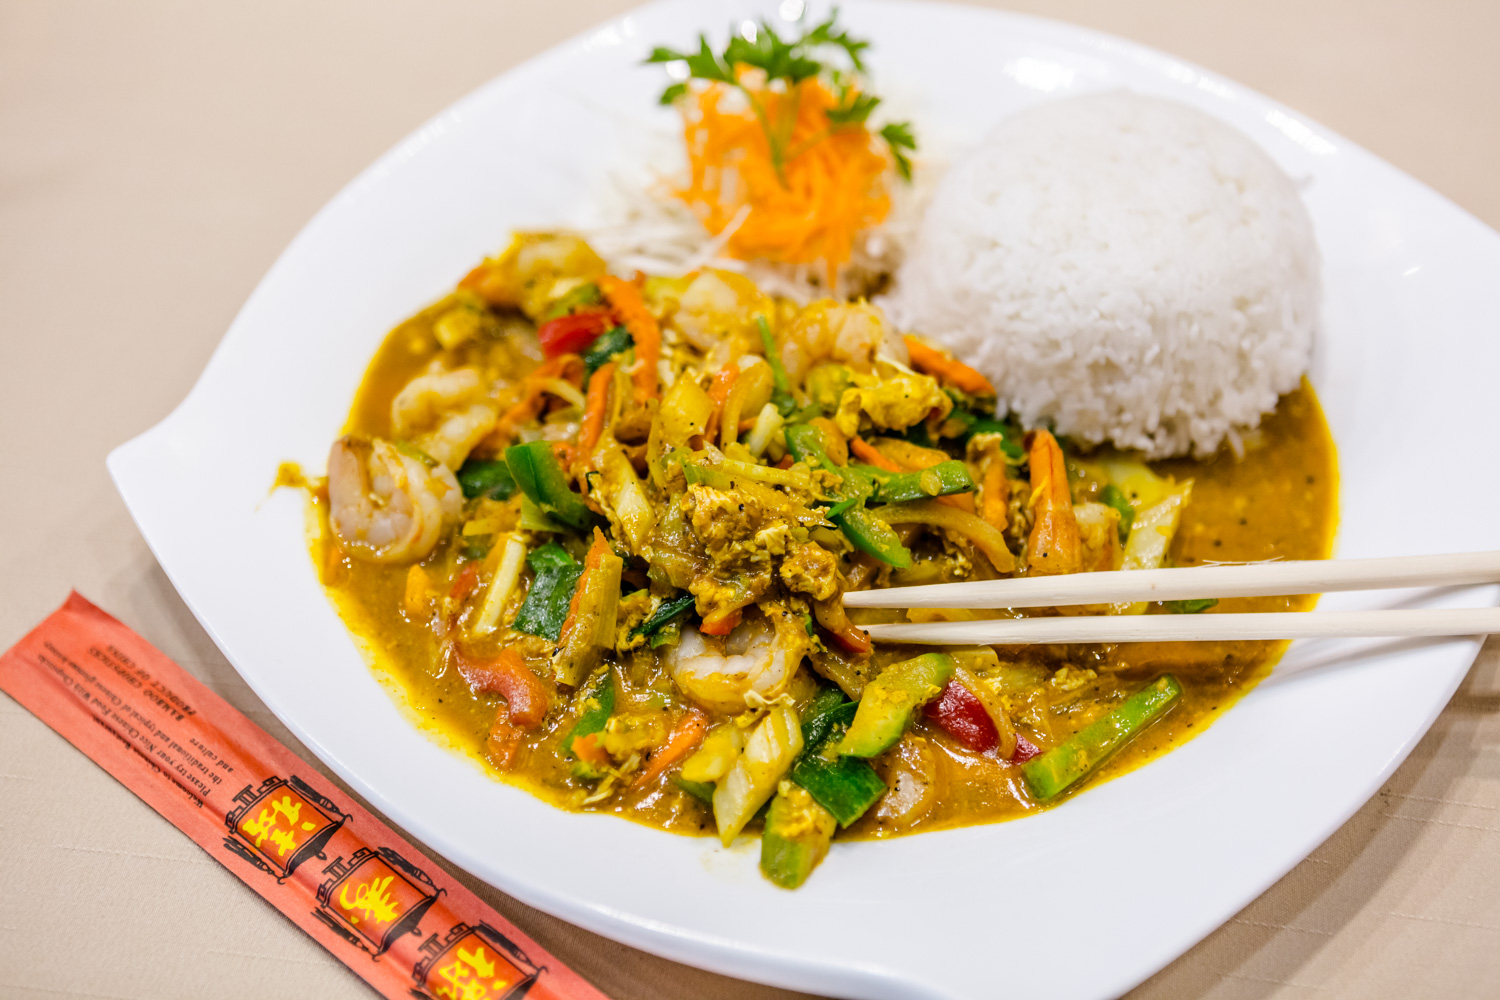 Thai Spicy Nine serves authentic dishes in downtown Budapest